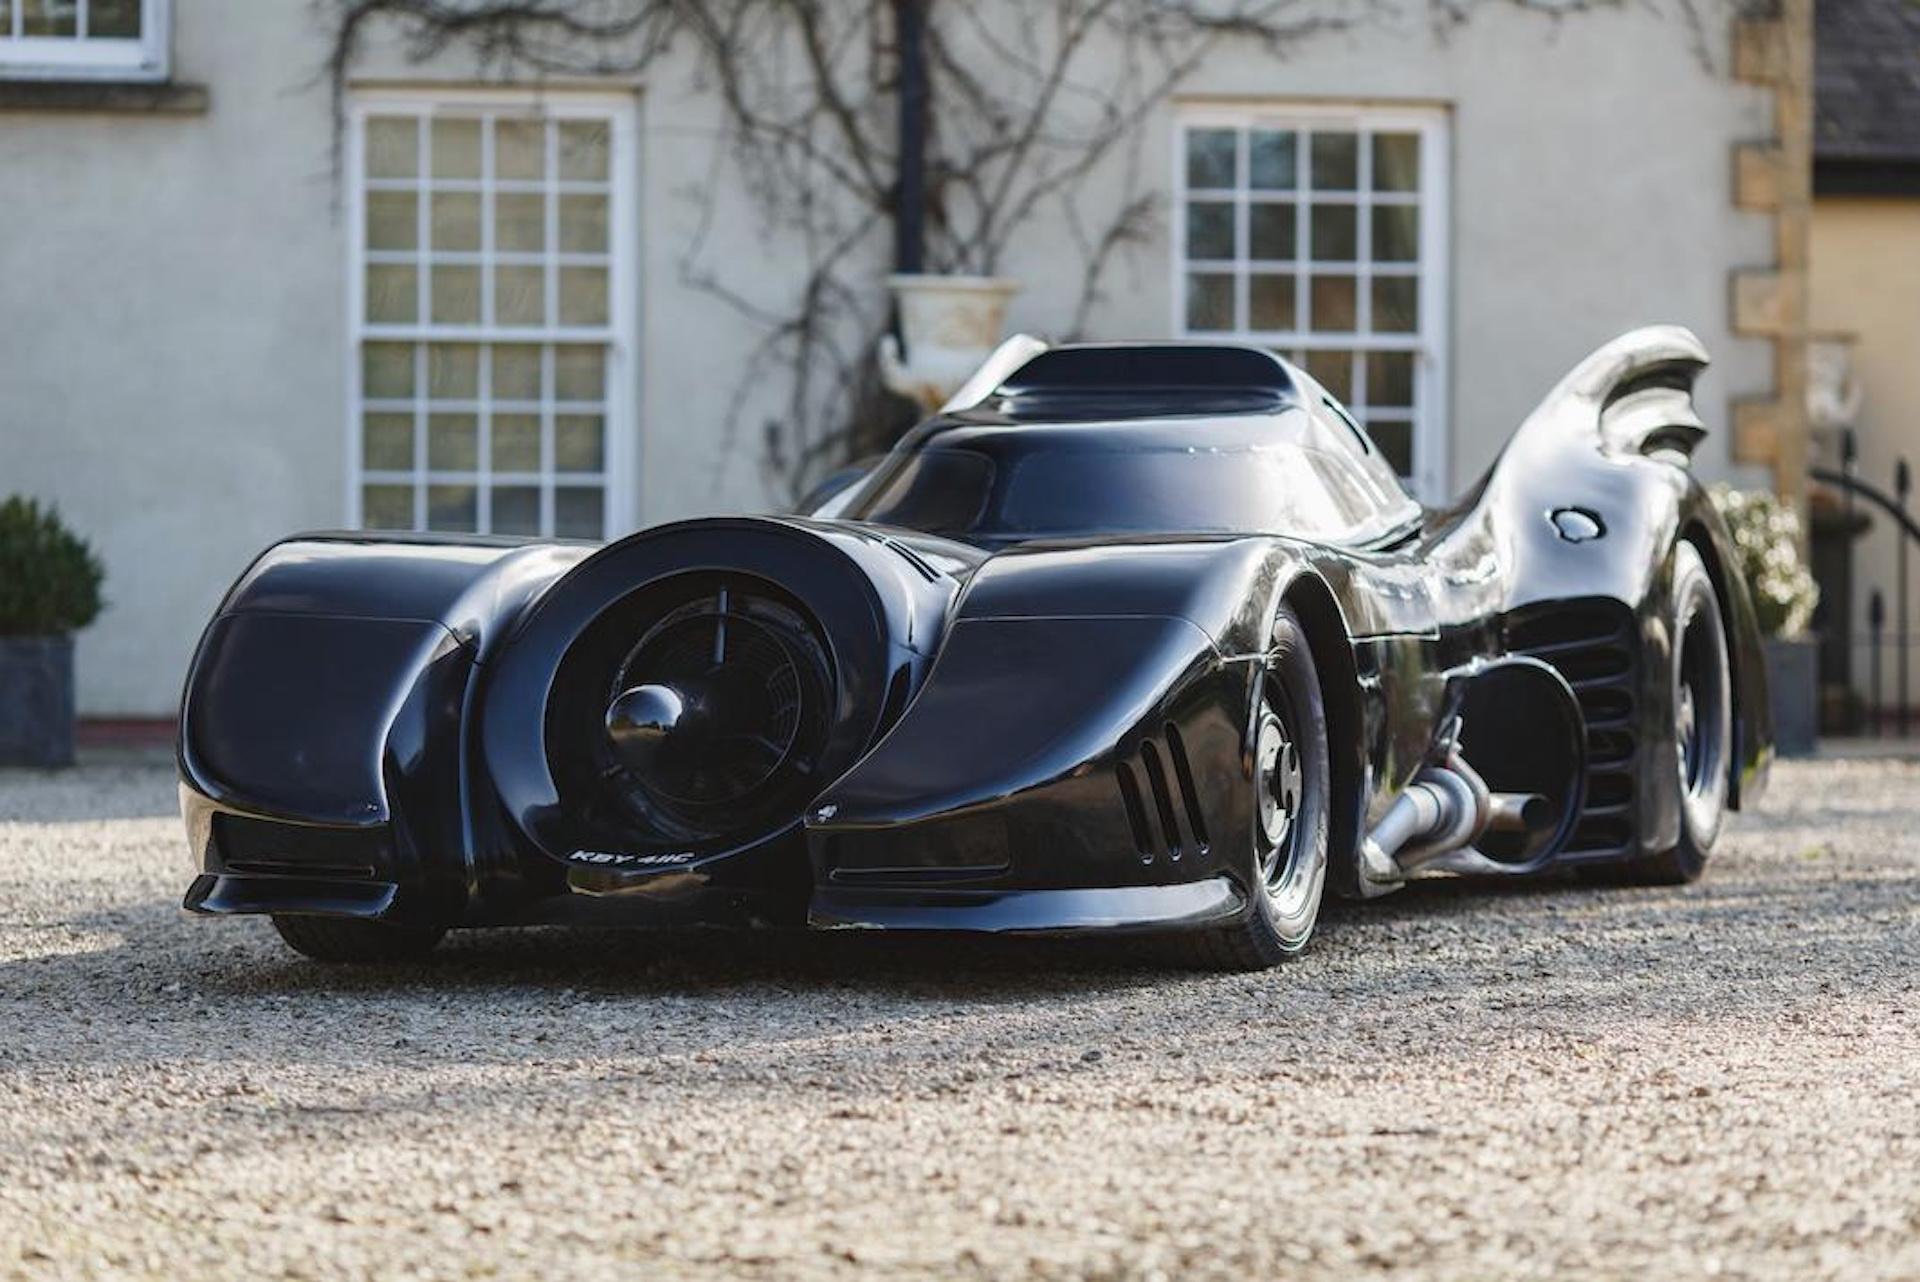 Buy this Batmobile re-creation for the price of a Honda Accord